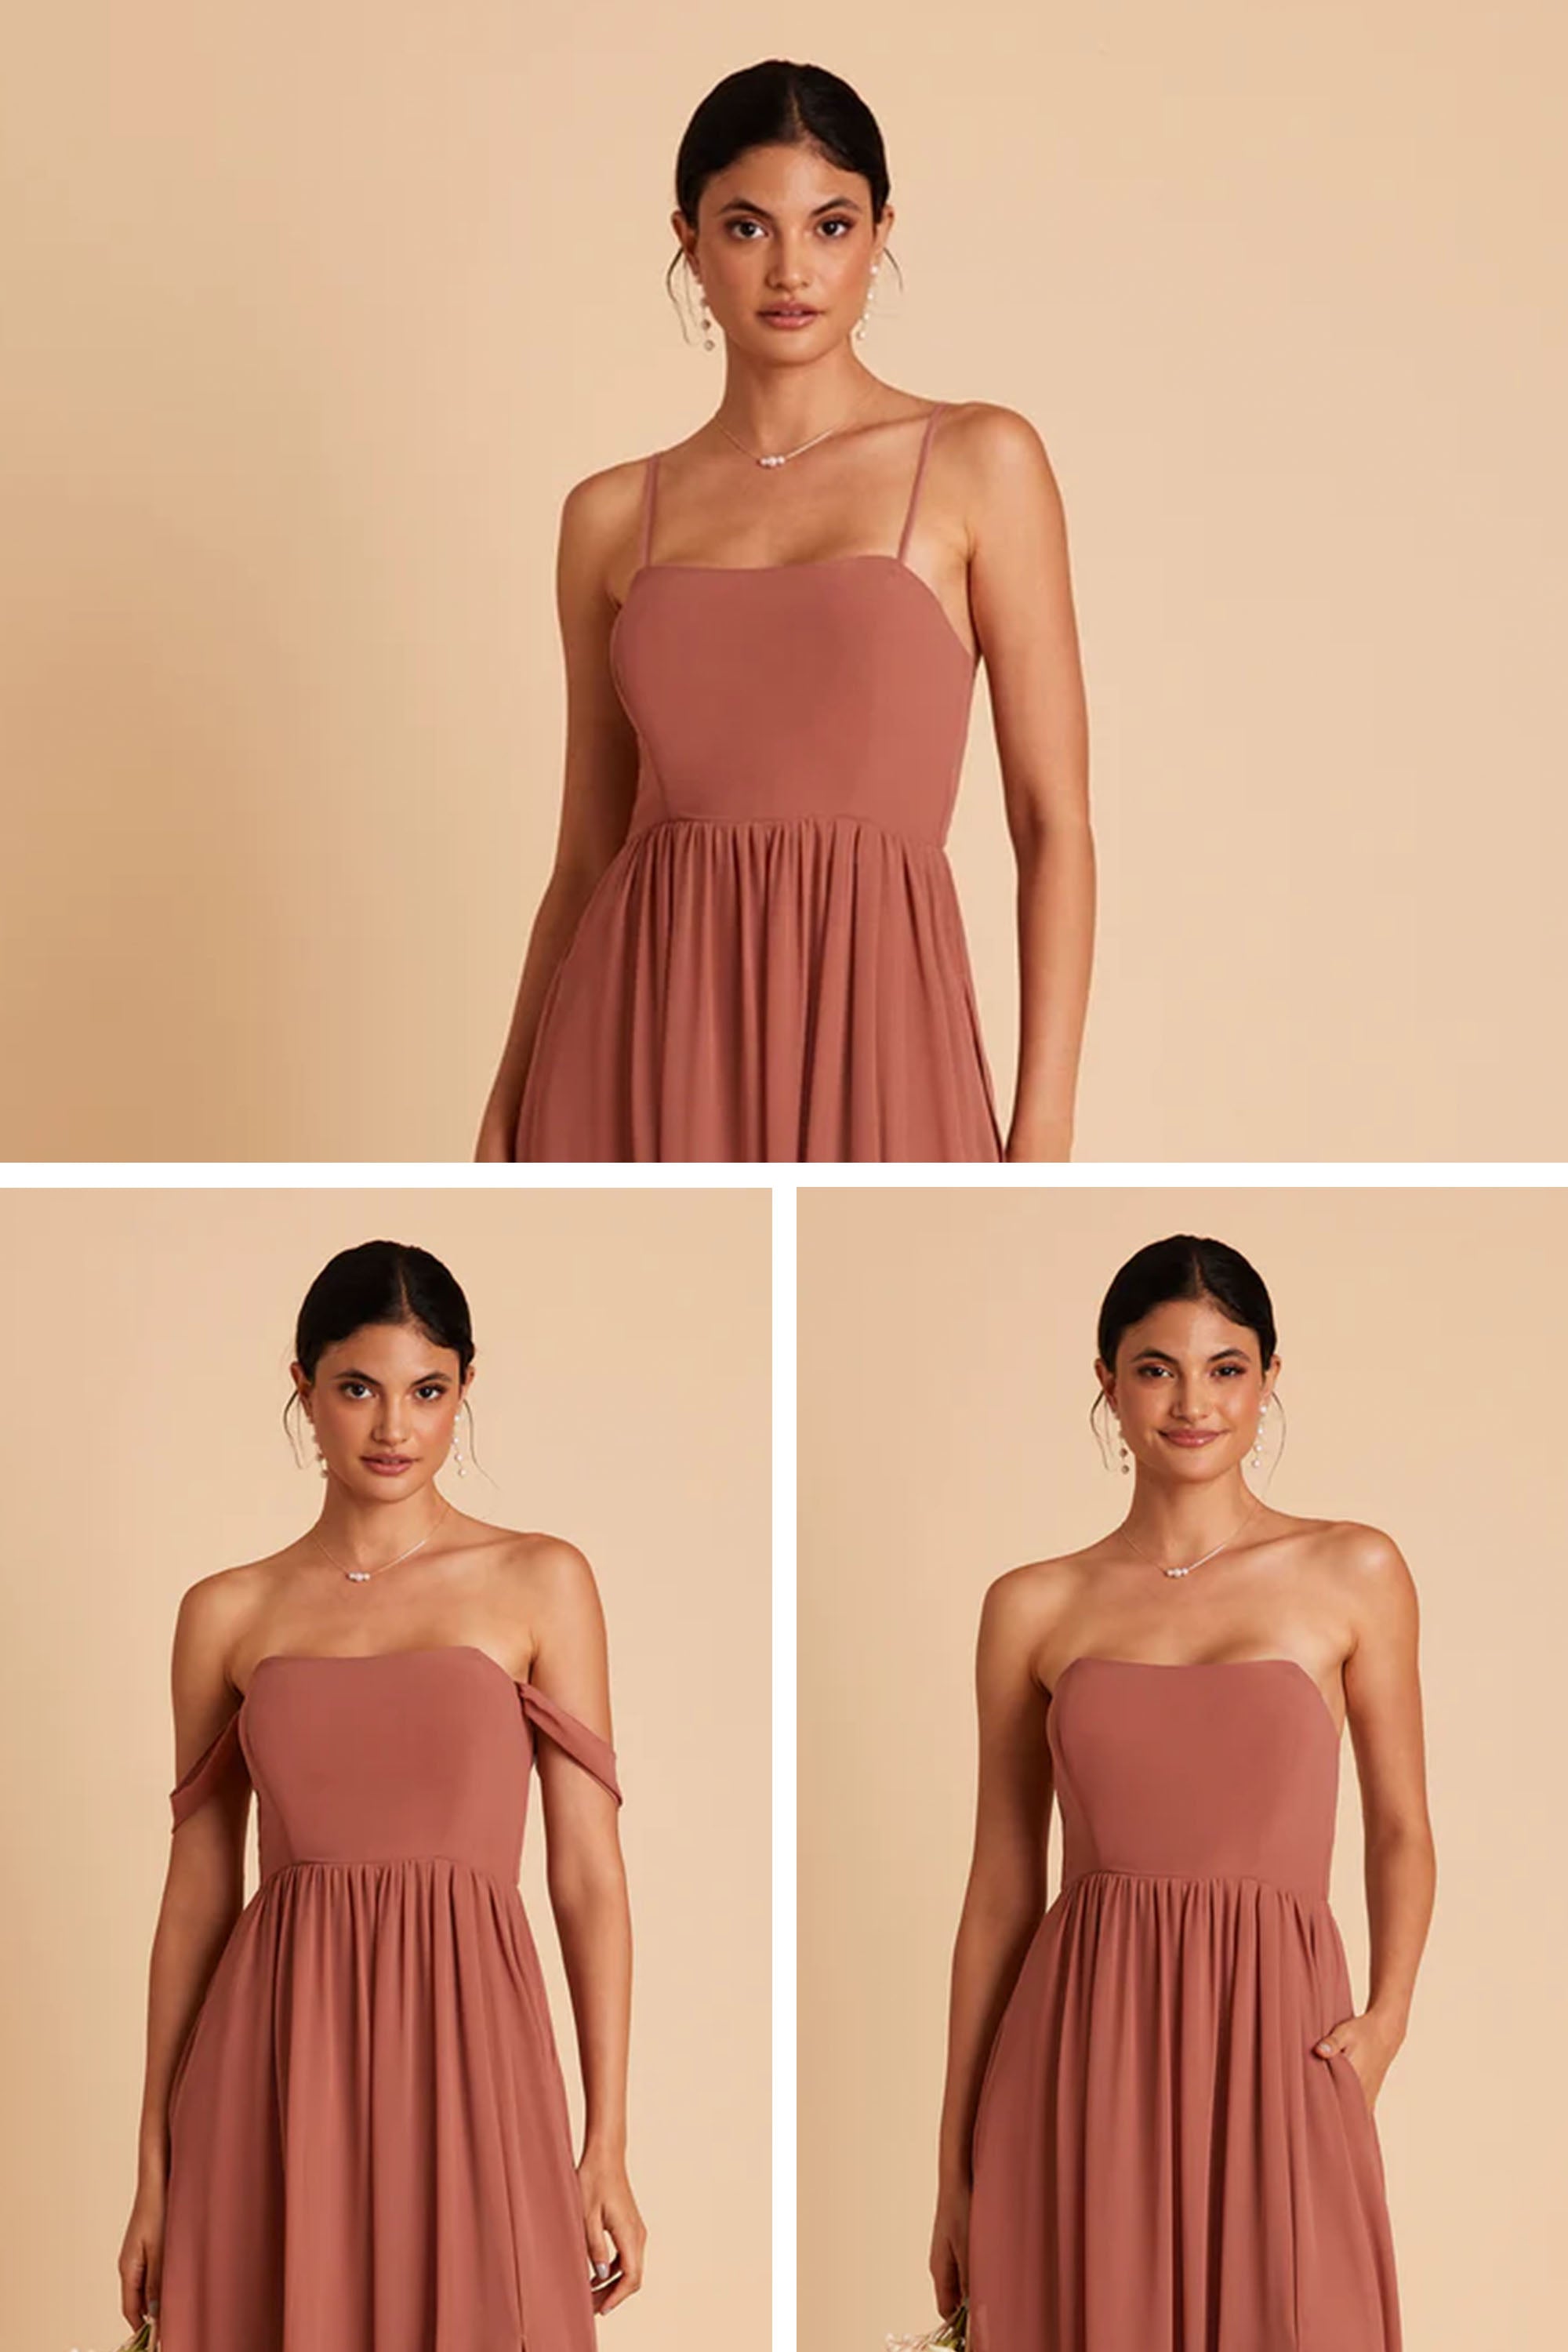 August Convertible Dress - Dusty Rose